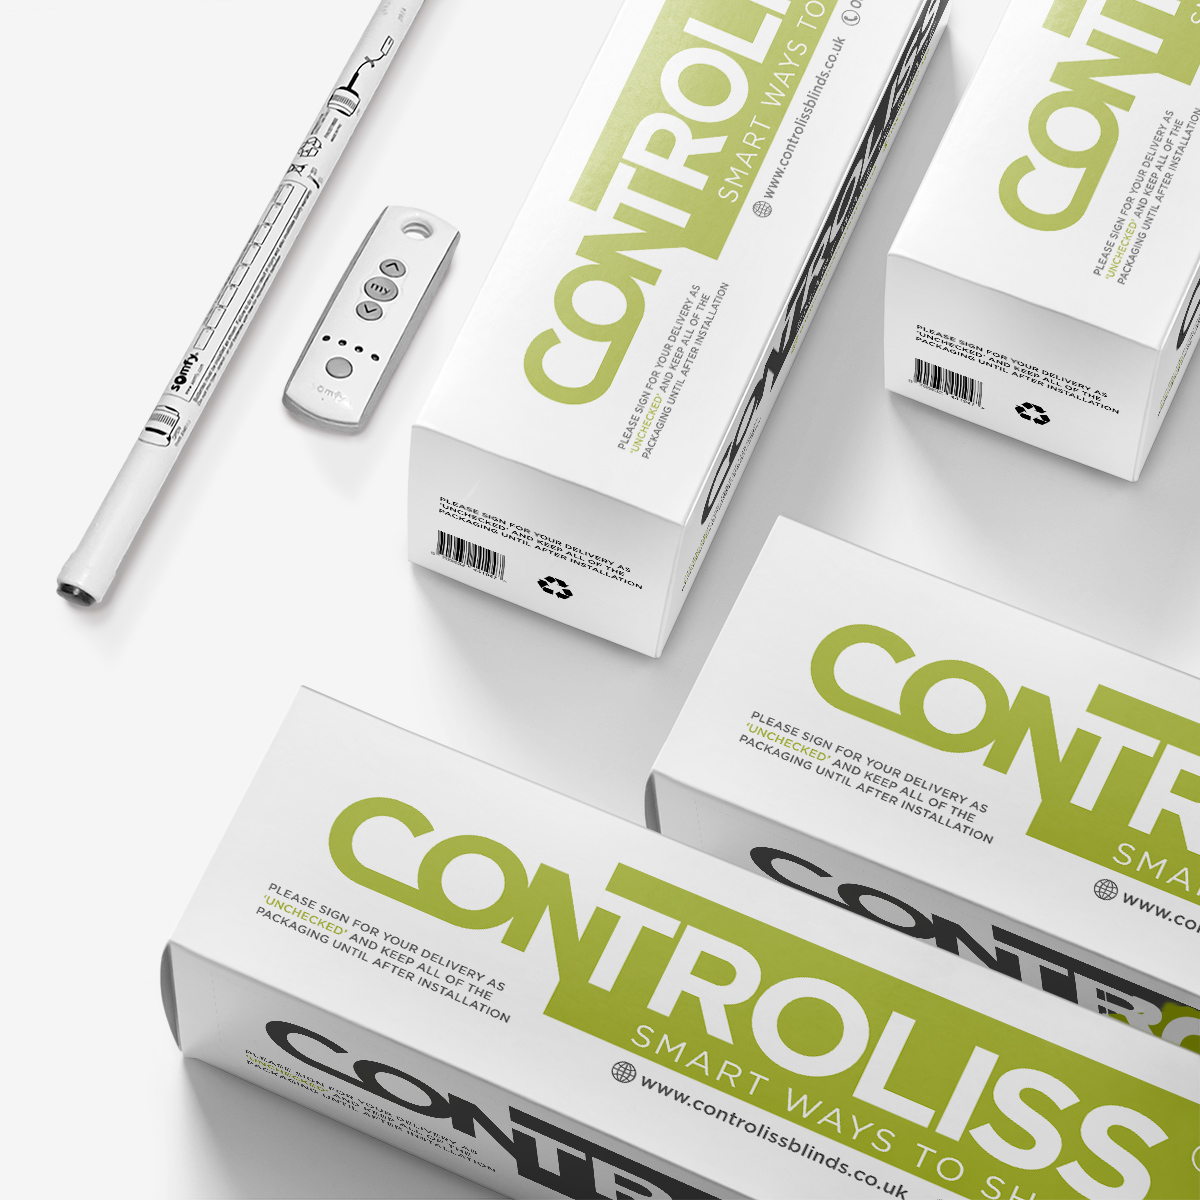 Controliss product packaging